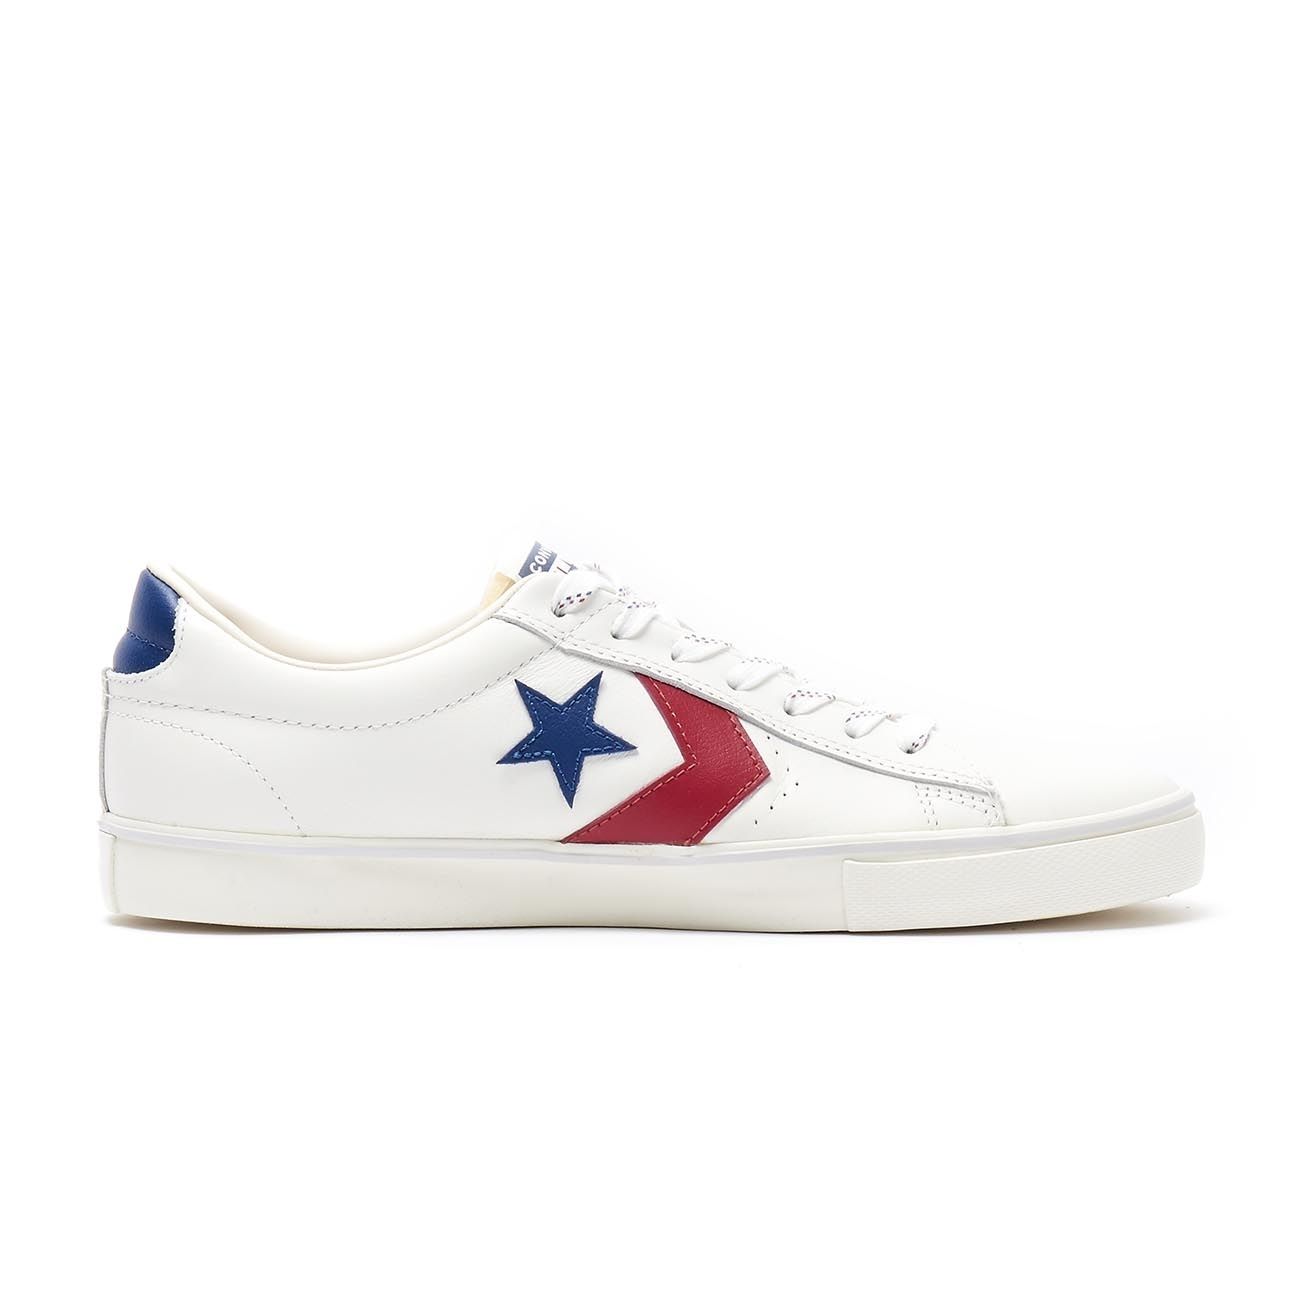 CONVERSE SNEAKERS PRO LEATHER VULC OX Uomo Vintage white navy ... صور سينشي